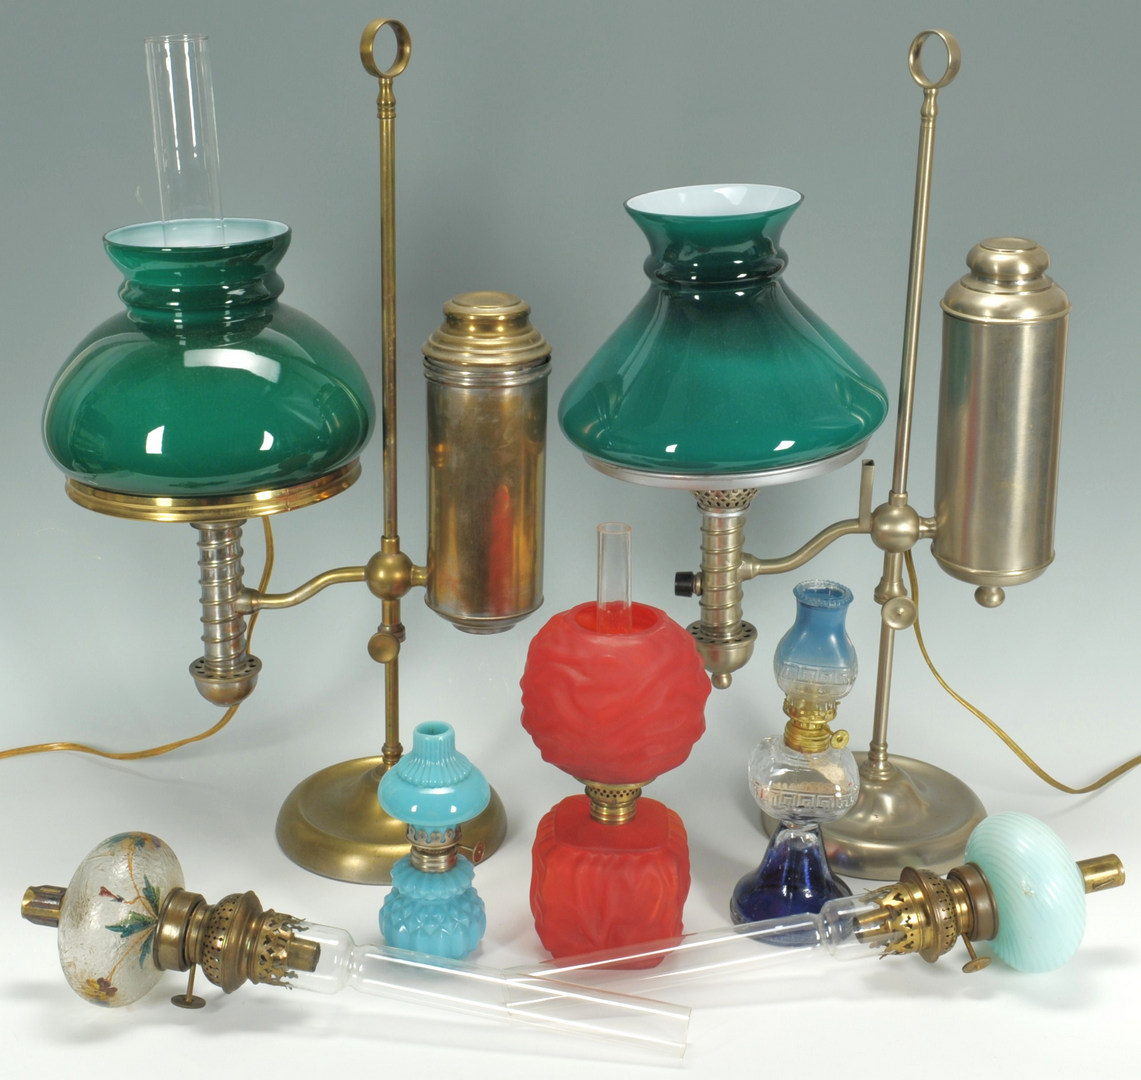 Lot 279: Grouping of 7 American Lamps